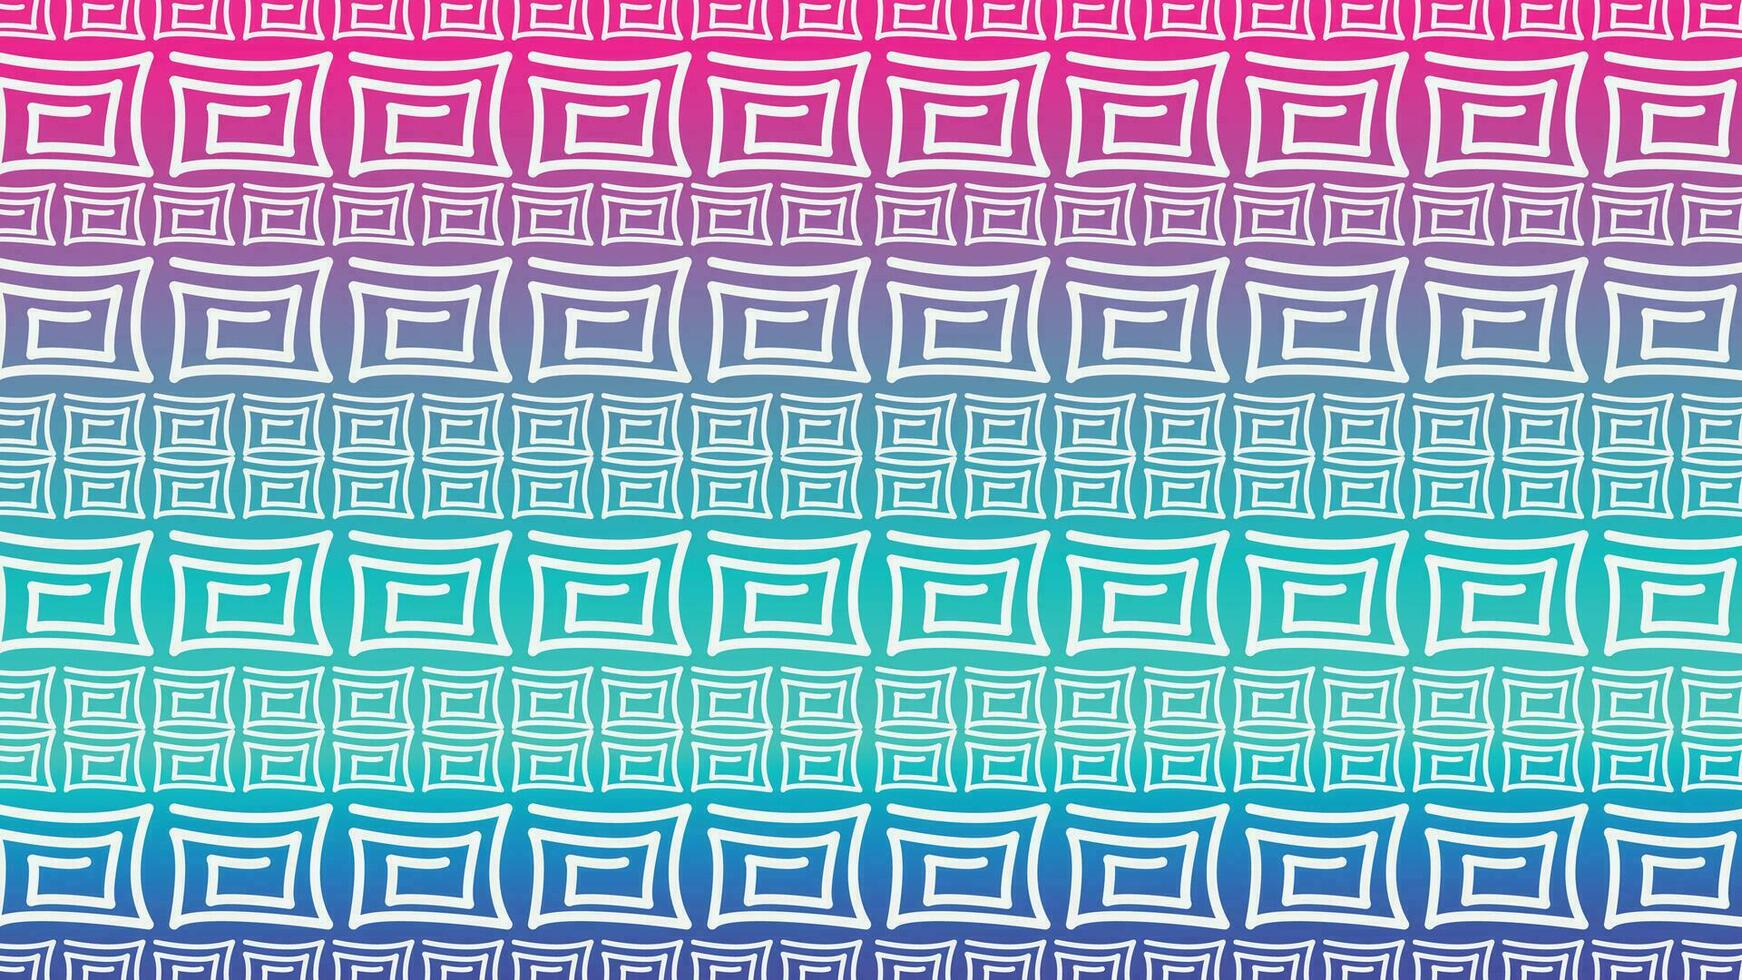 etnic triball pattern with muti color background vector